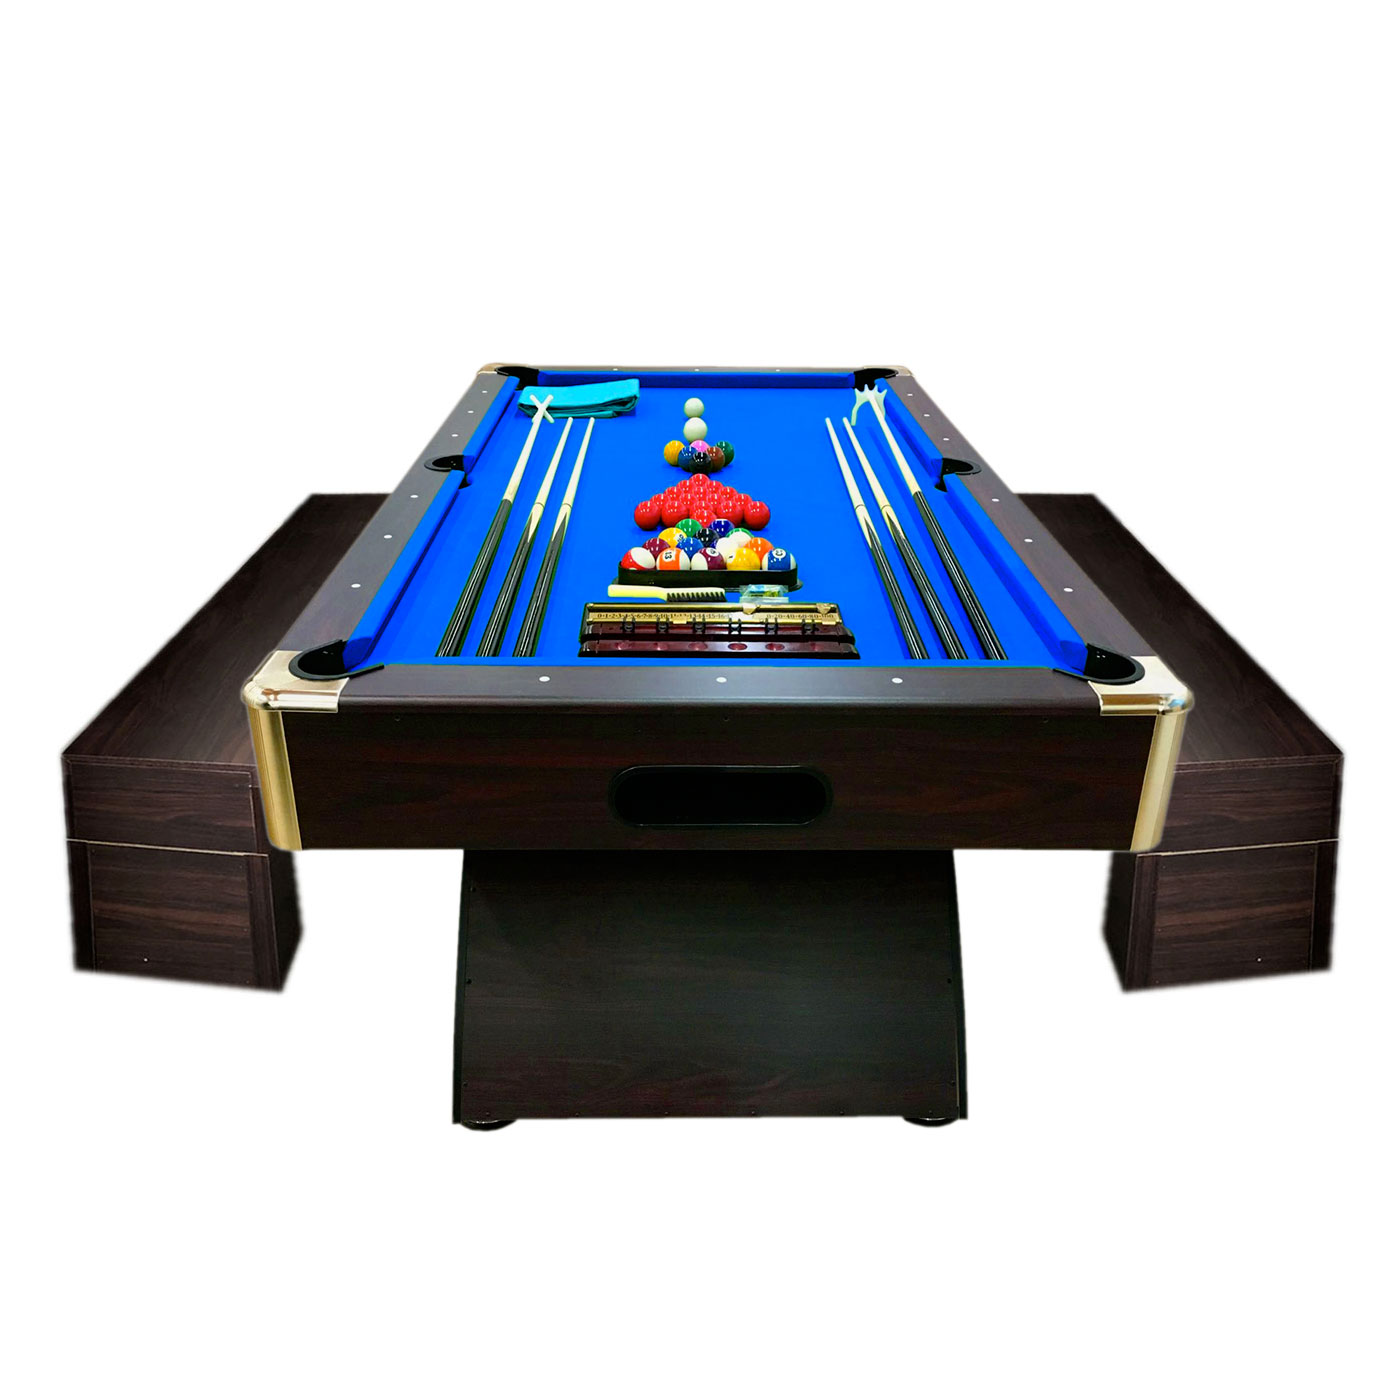 Pool Table 7FT Model MISSISIPI Snooker Full Accessories 7FT Become A Beautiful Table ! Coverage Plan Included in The Price !! 